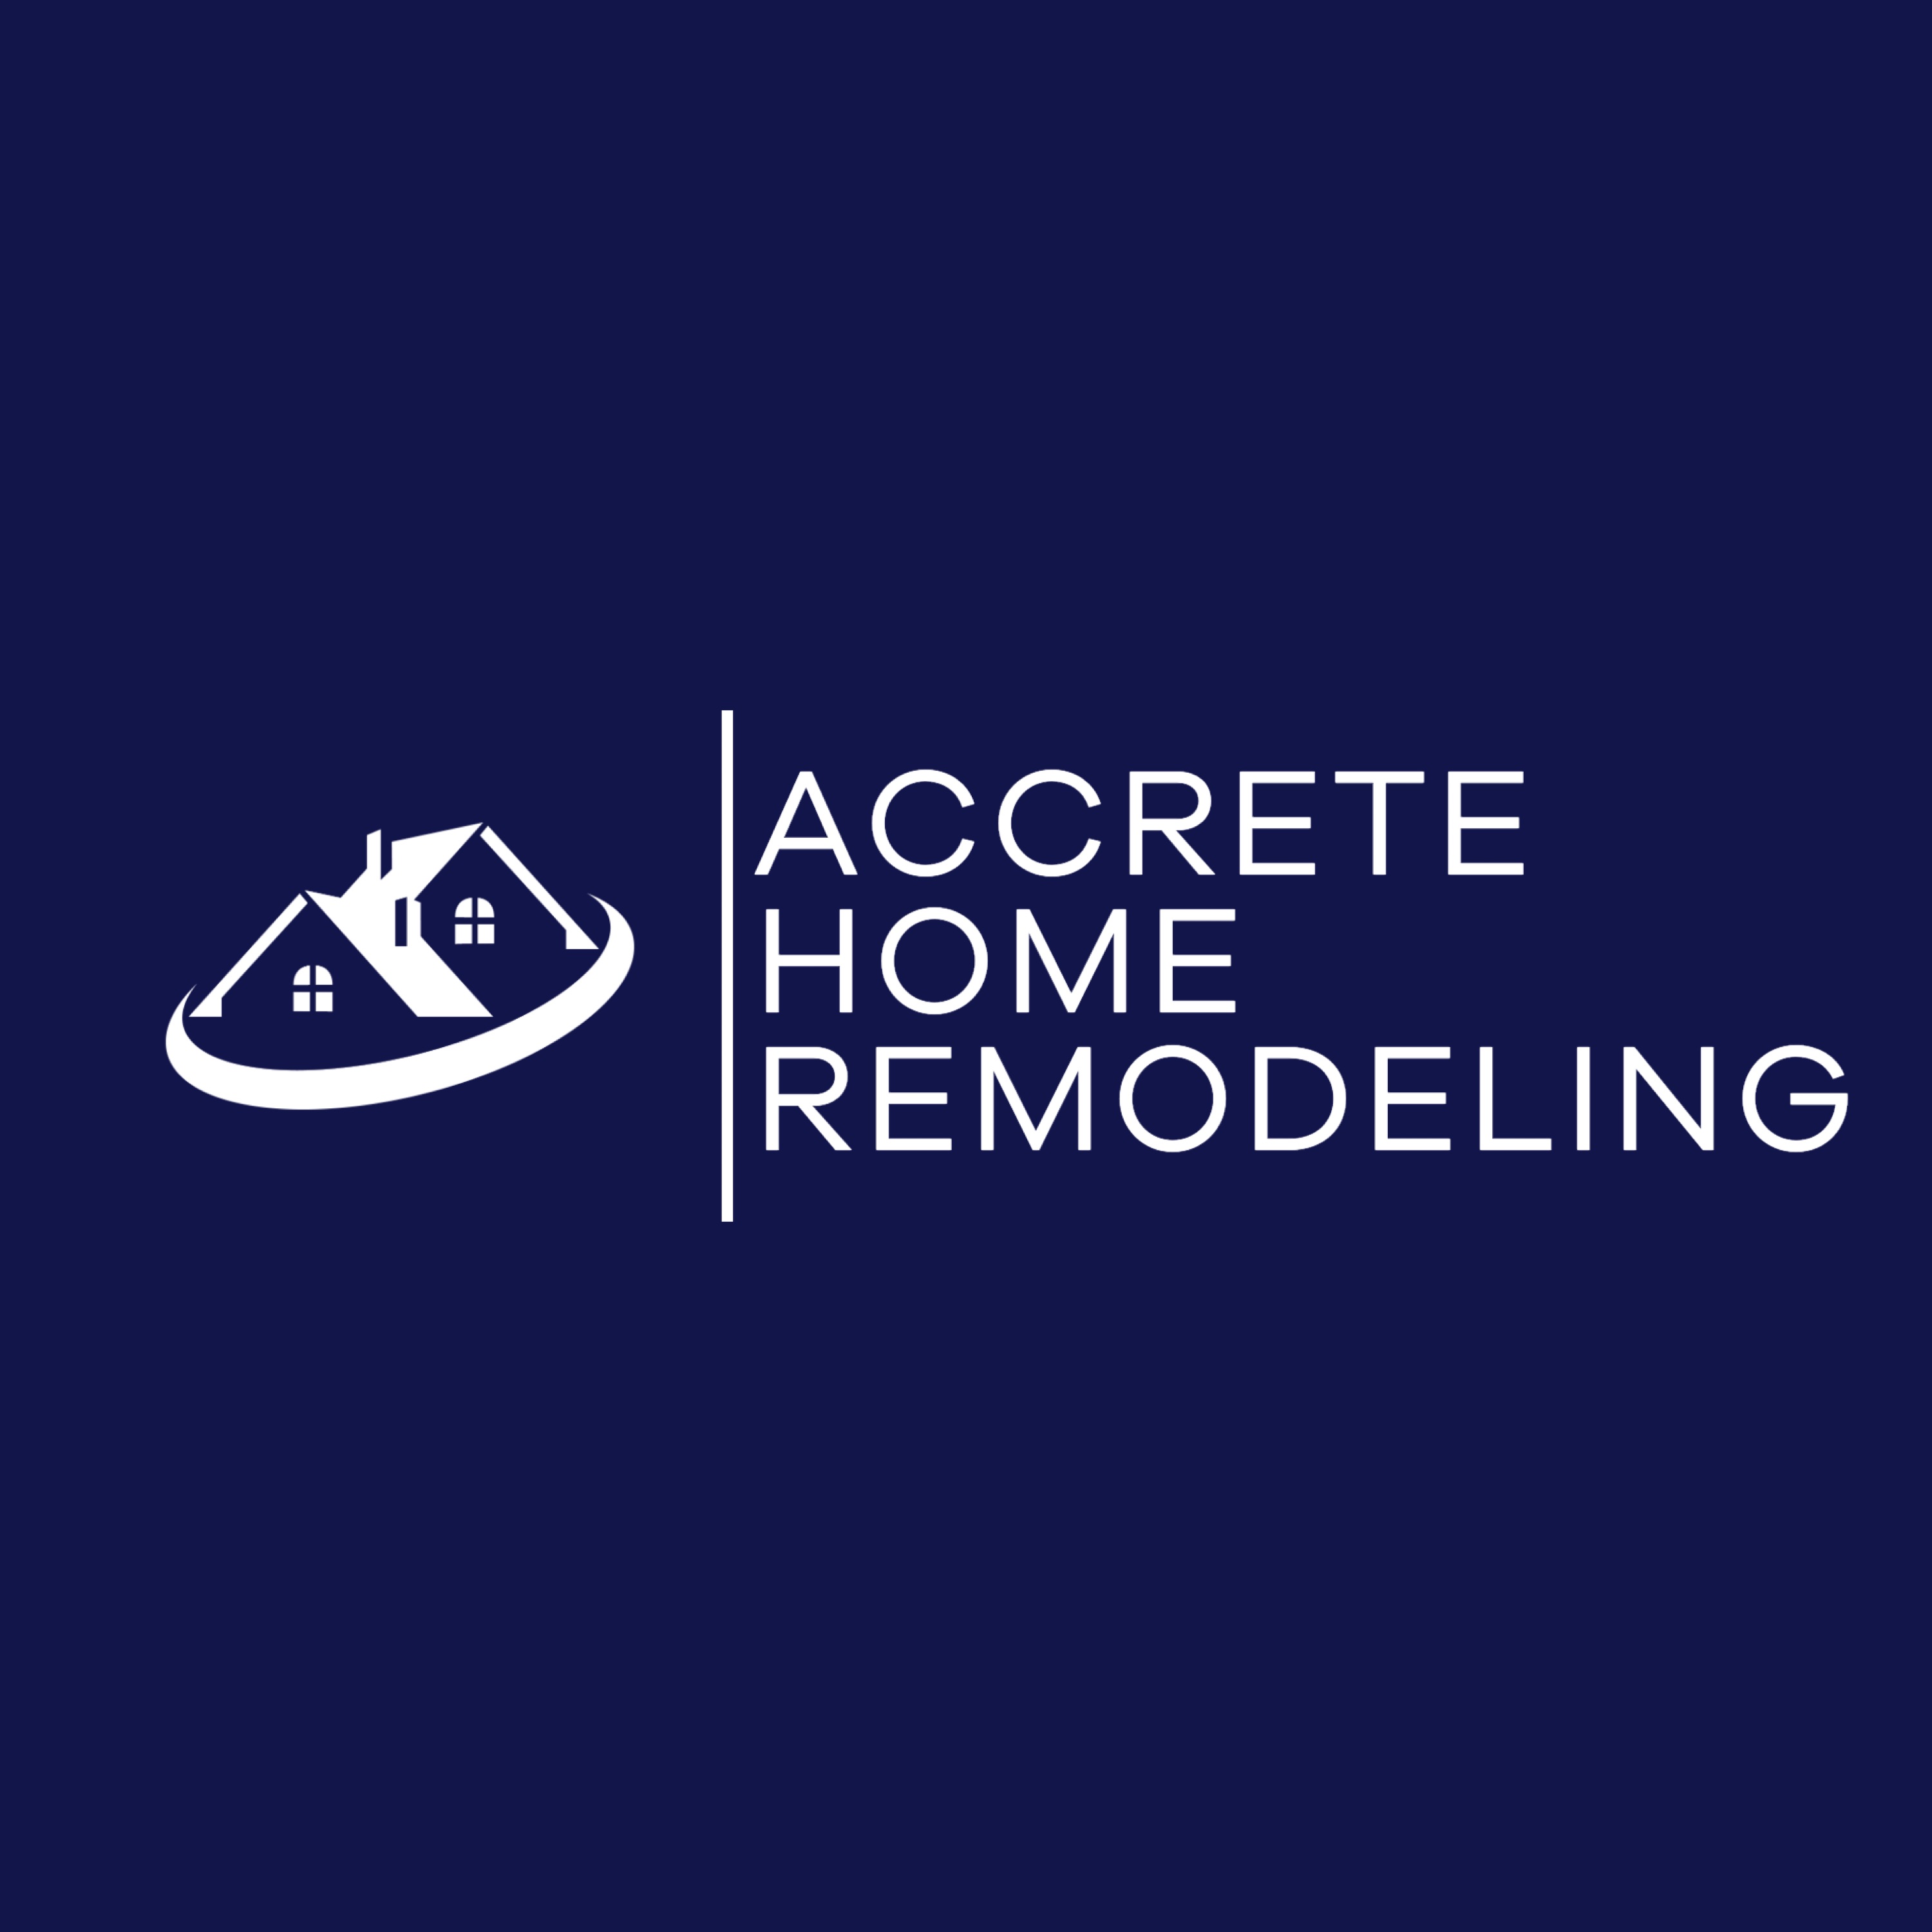 Accrete Home Remodeling, Inc. Logo